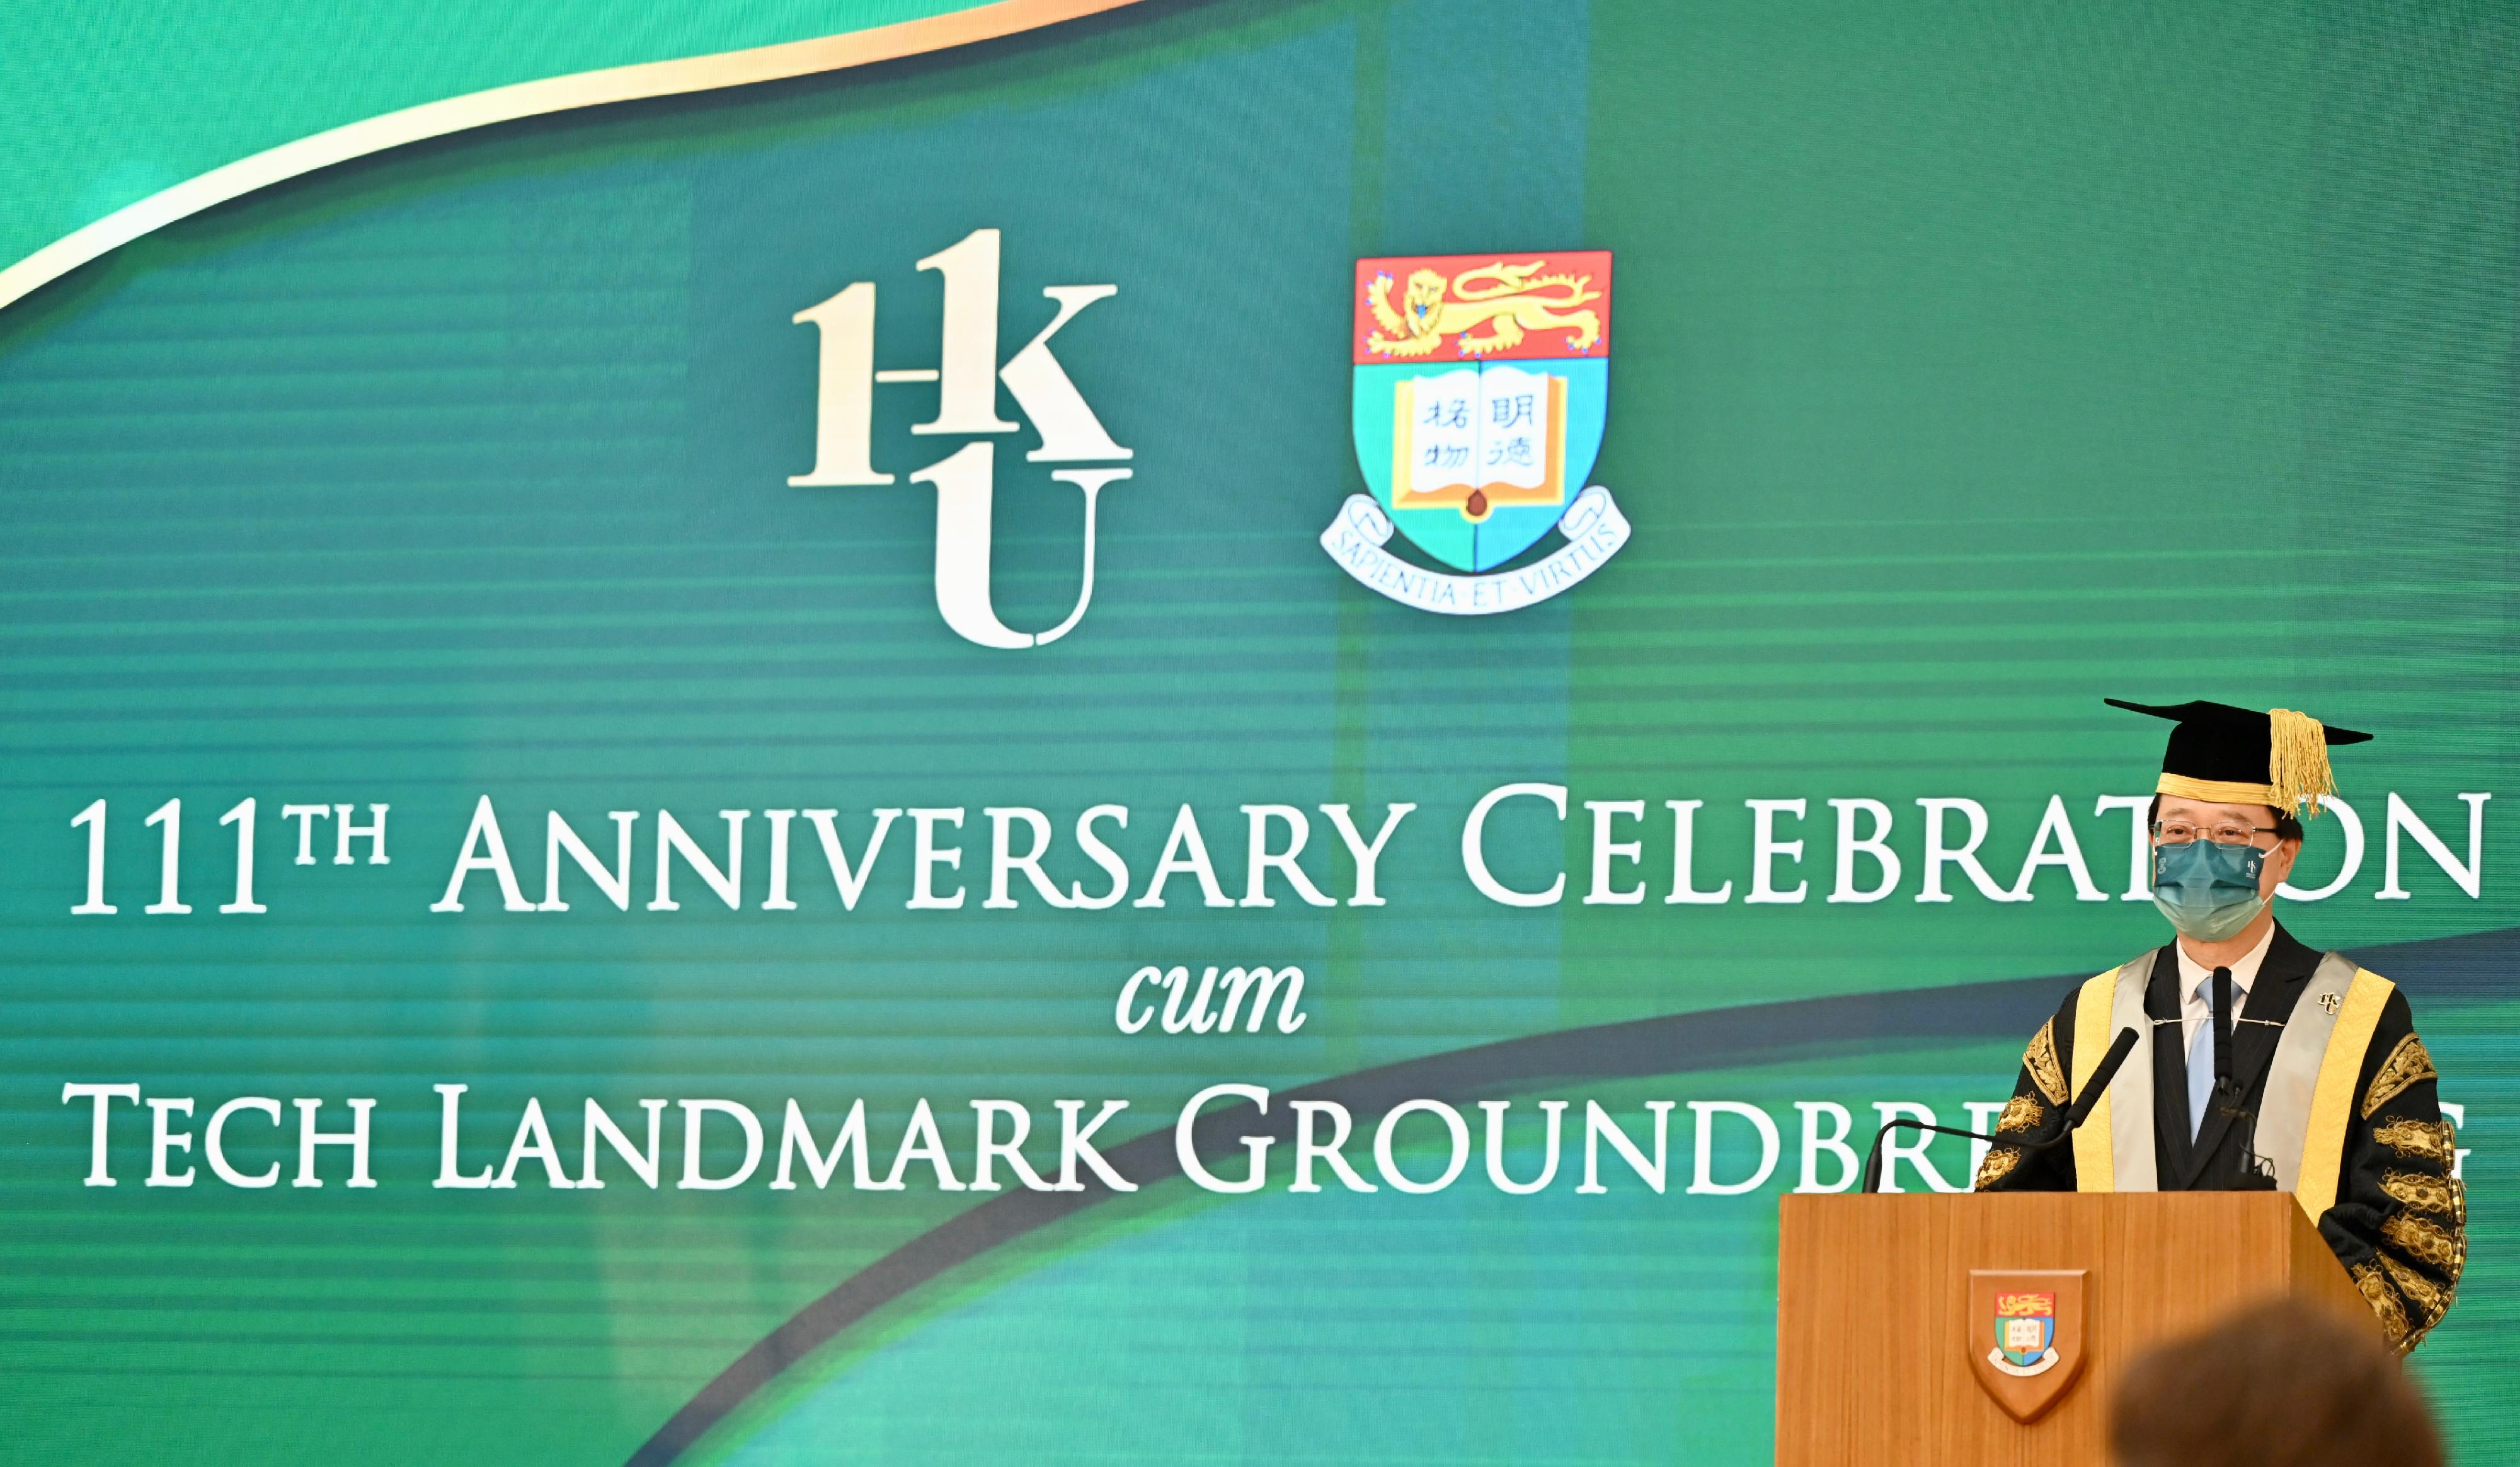 The Chief Executive, Mr John Lee, speaks at the University of Hong Kong 111th Anniversary Celebration-cum-Tech Landmark Ground-breaking Ceremony today (July 23).